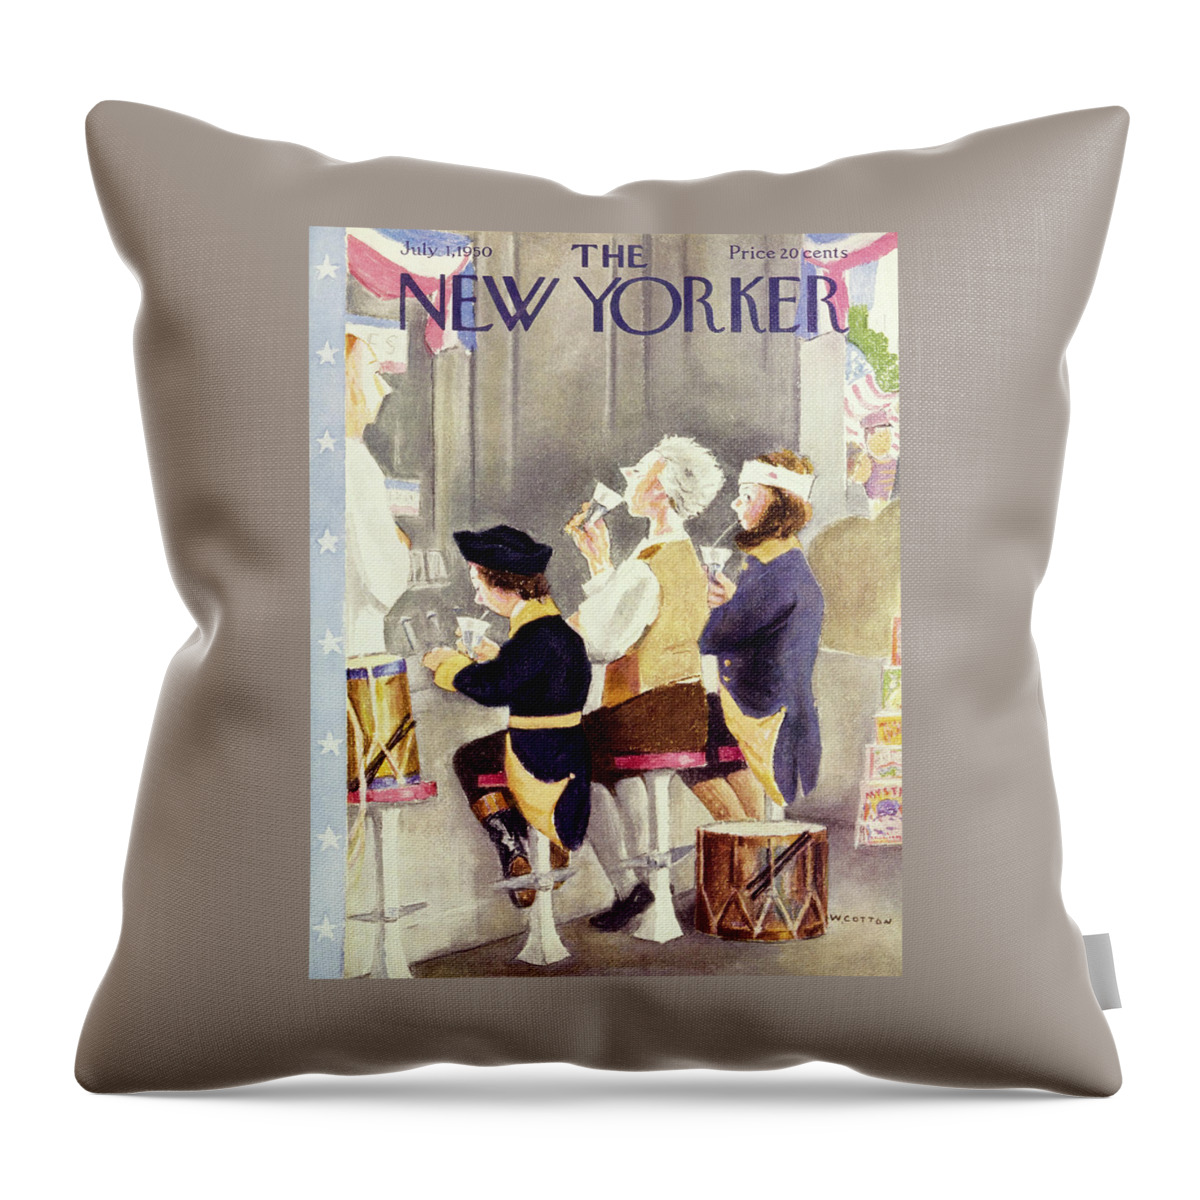 New Yorker July 1 1950 Throw Pillow